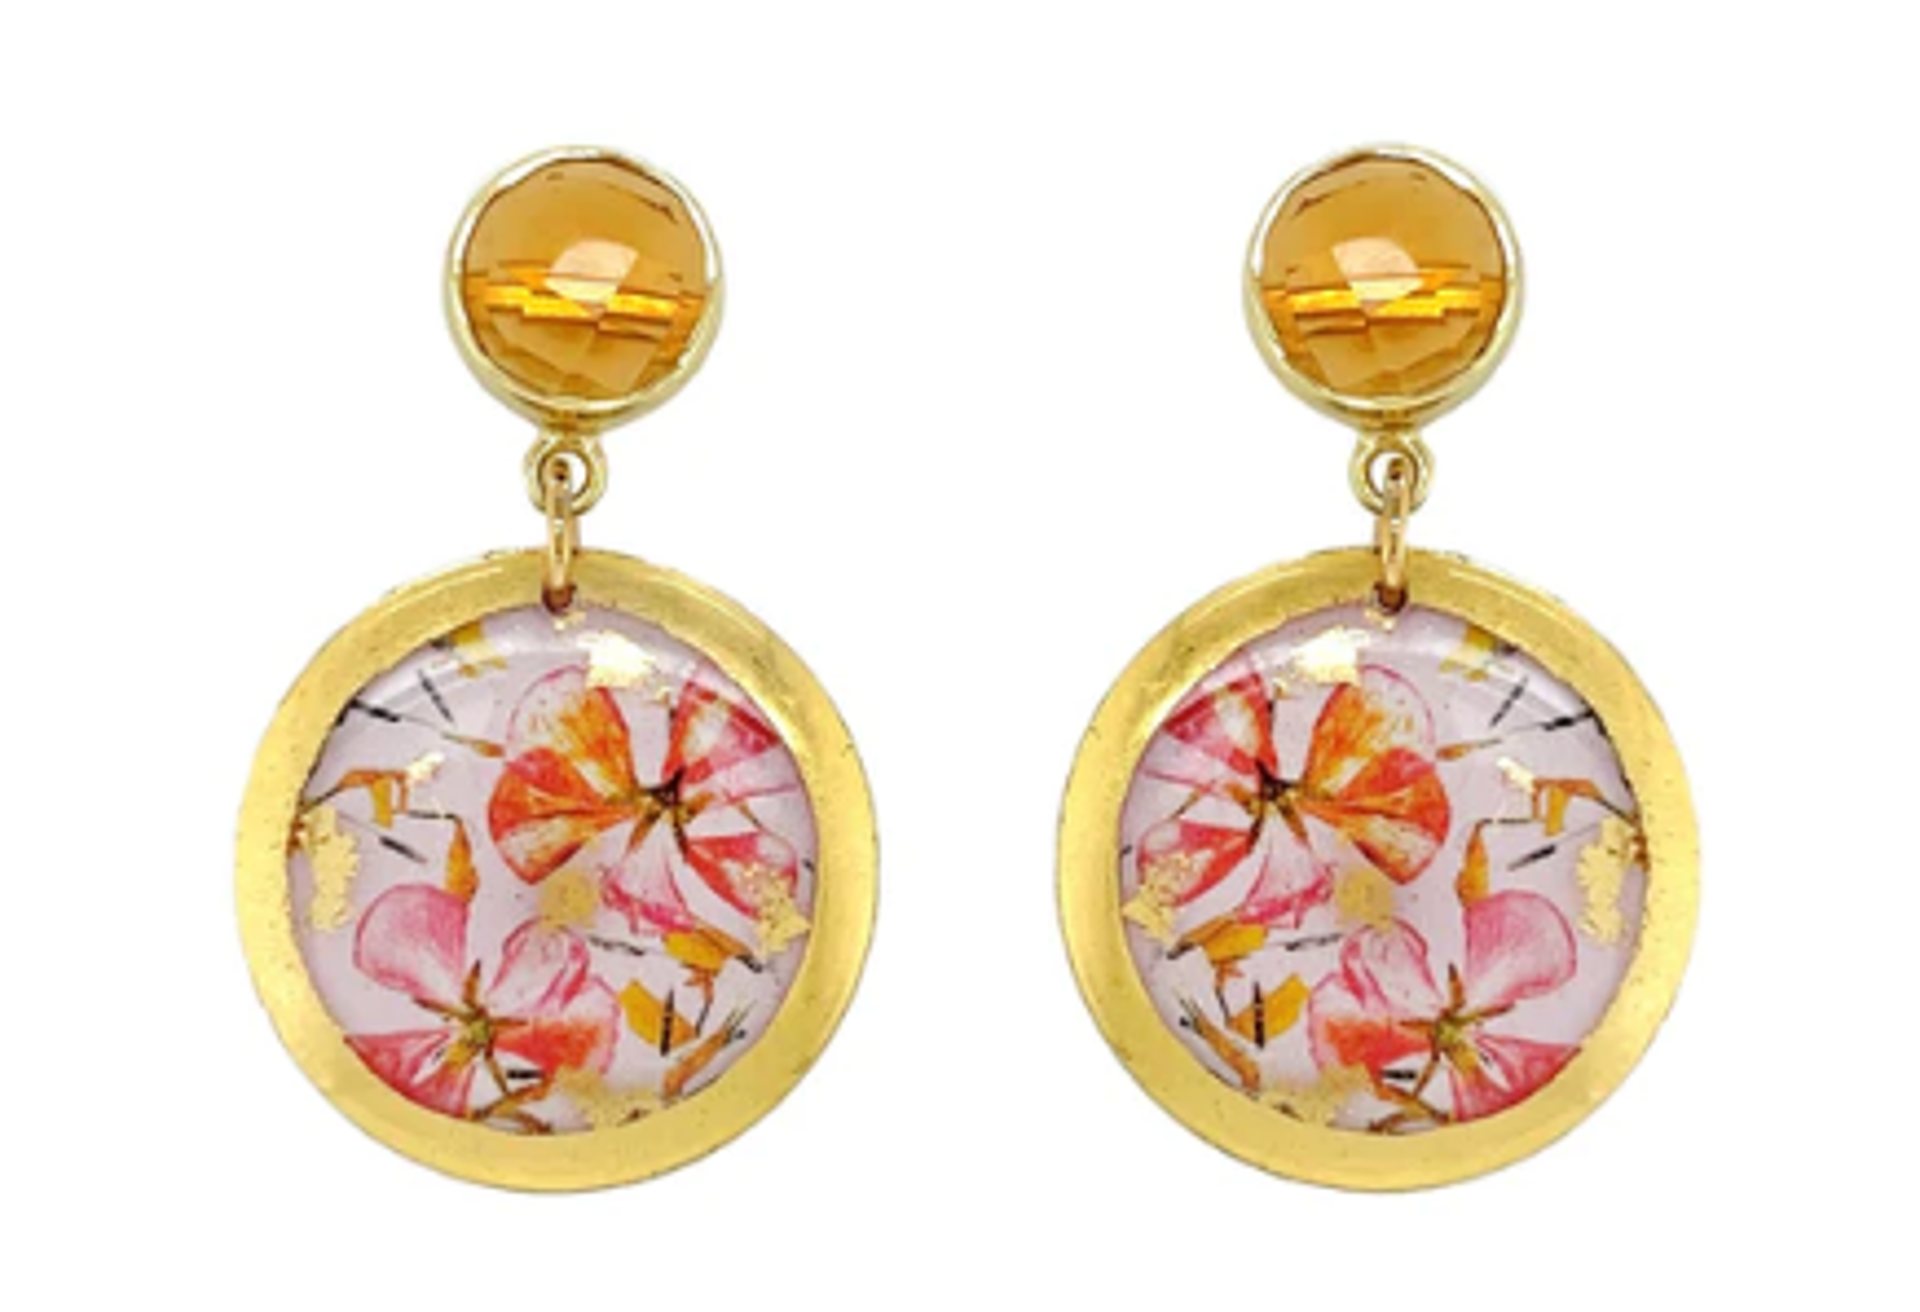 Minerva Disc Earrings With Citrine Posts by Evocateur